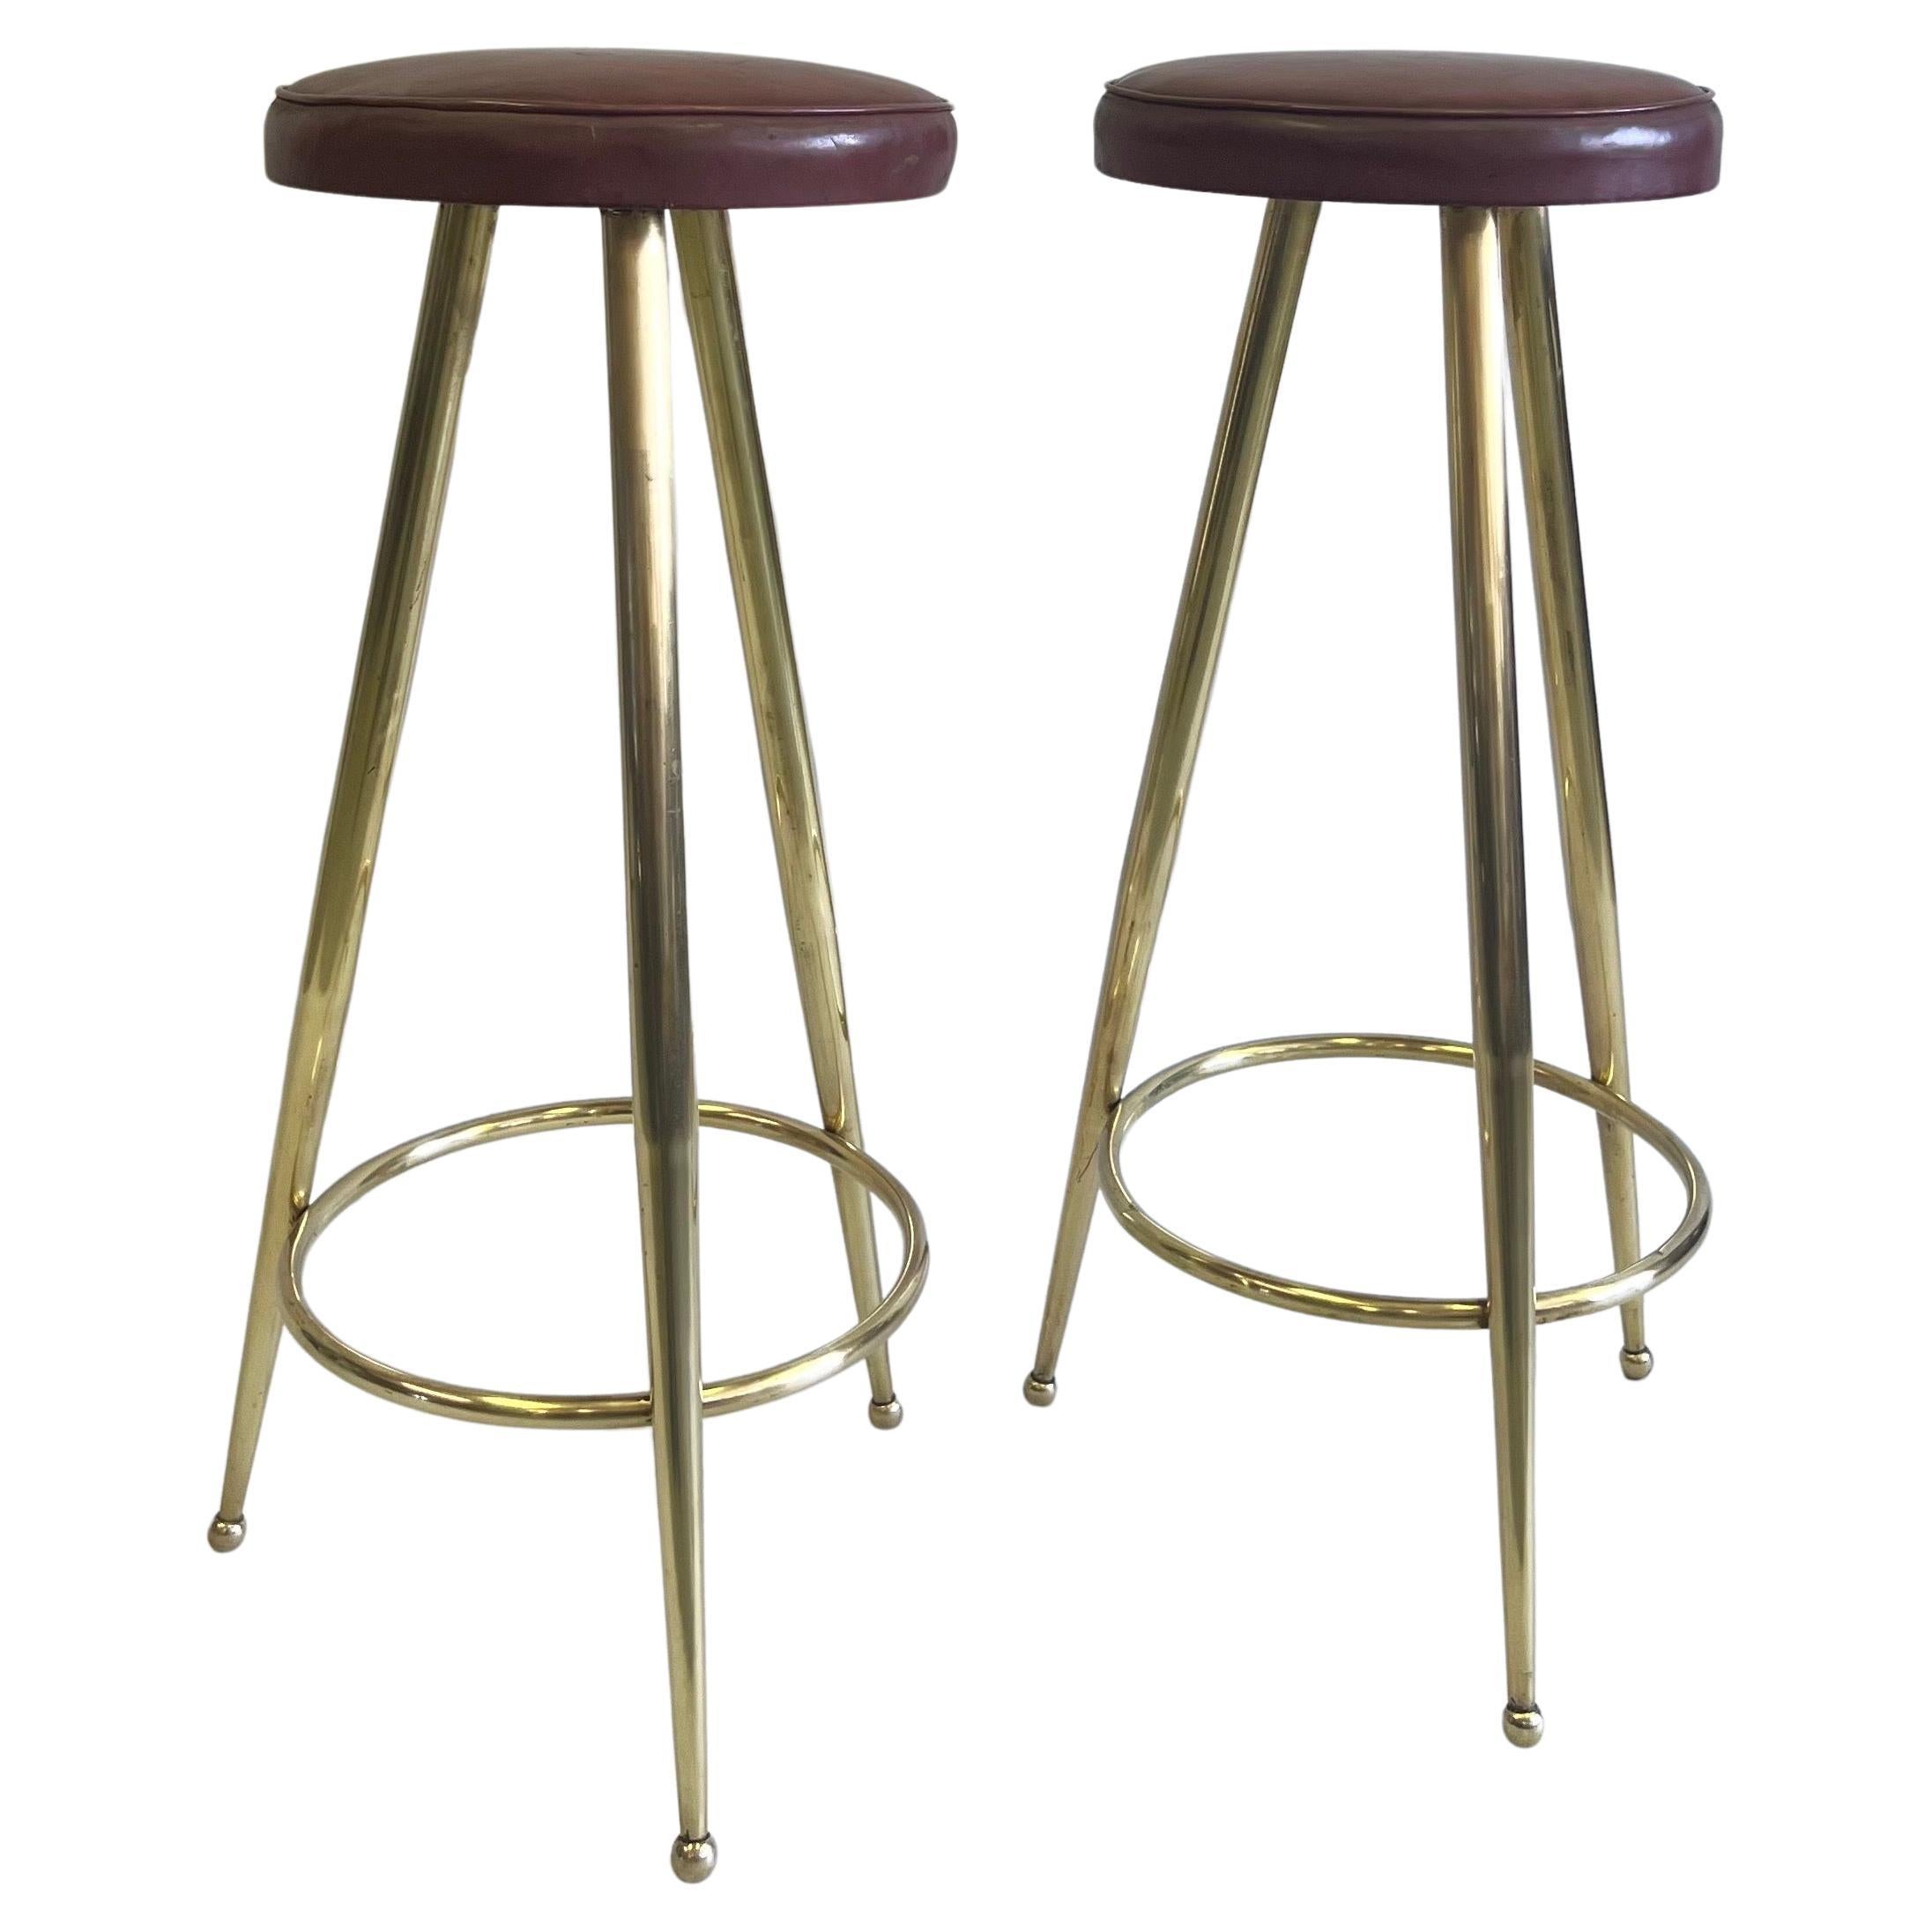 An Elegant and Timeless Pair of Italian Midcentury Modern Bar Stools in Solid Brass by Gio Ponti. The bar stools present an open, transparent aesthetic with pure lines and sober details. They are comfortable and practical while maintaining their